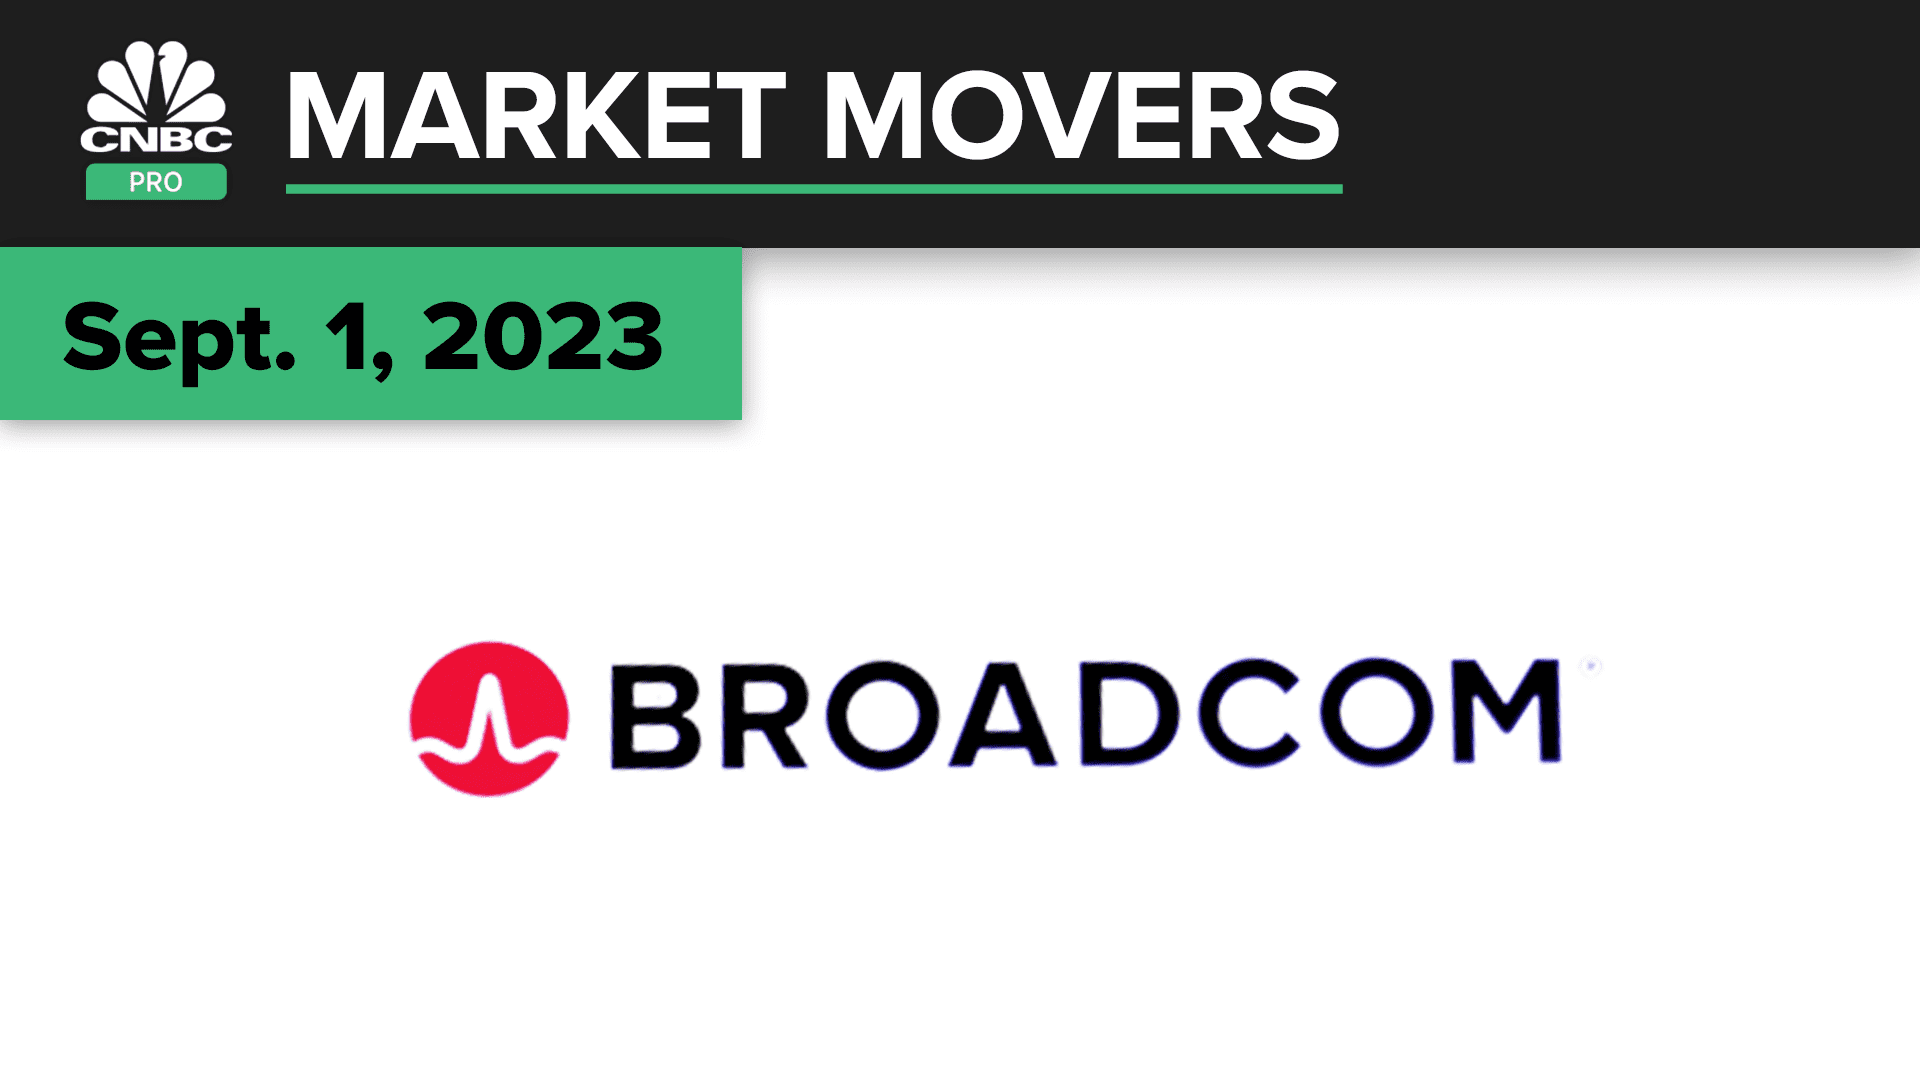 Broadcom slips after issuing fiscal fourth-quarter revenue guidance. Why pros say it’s a good time to buy